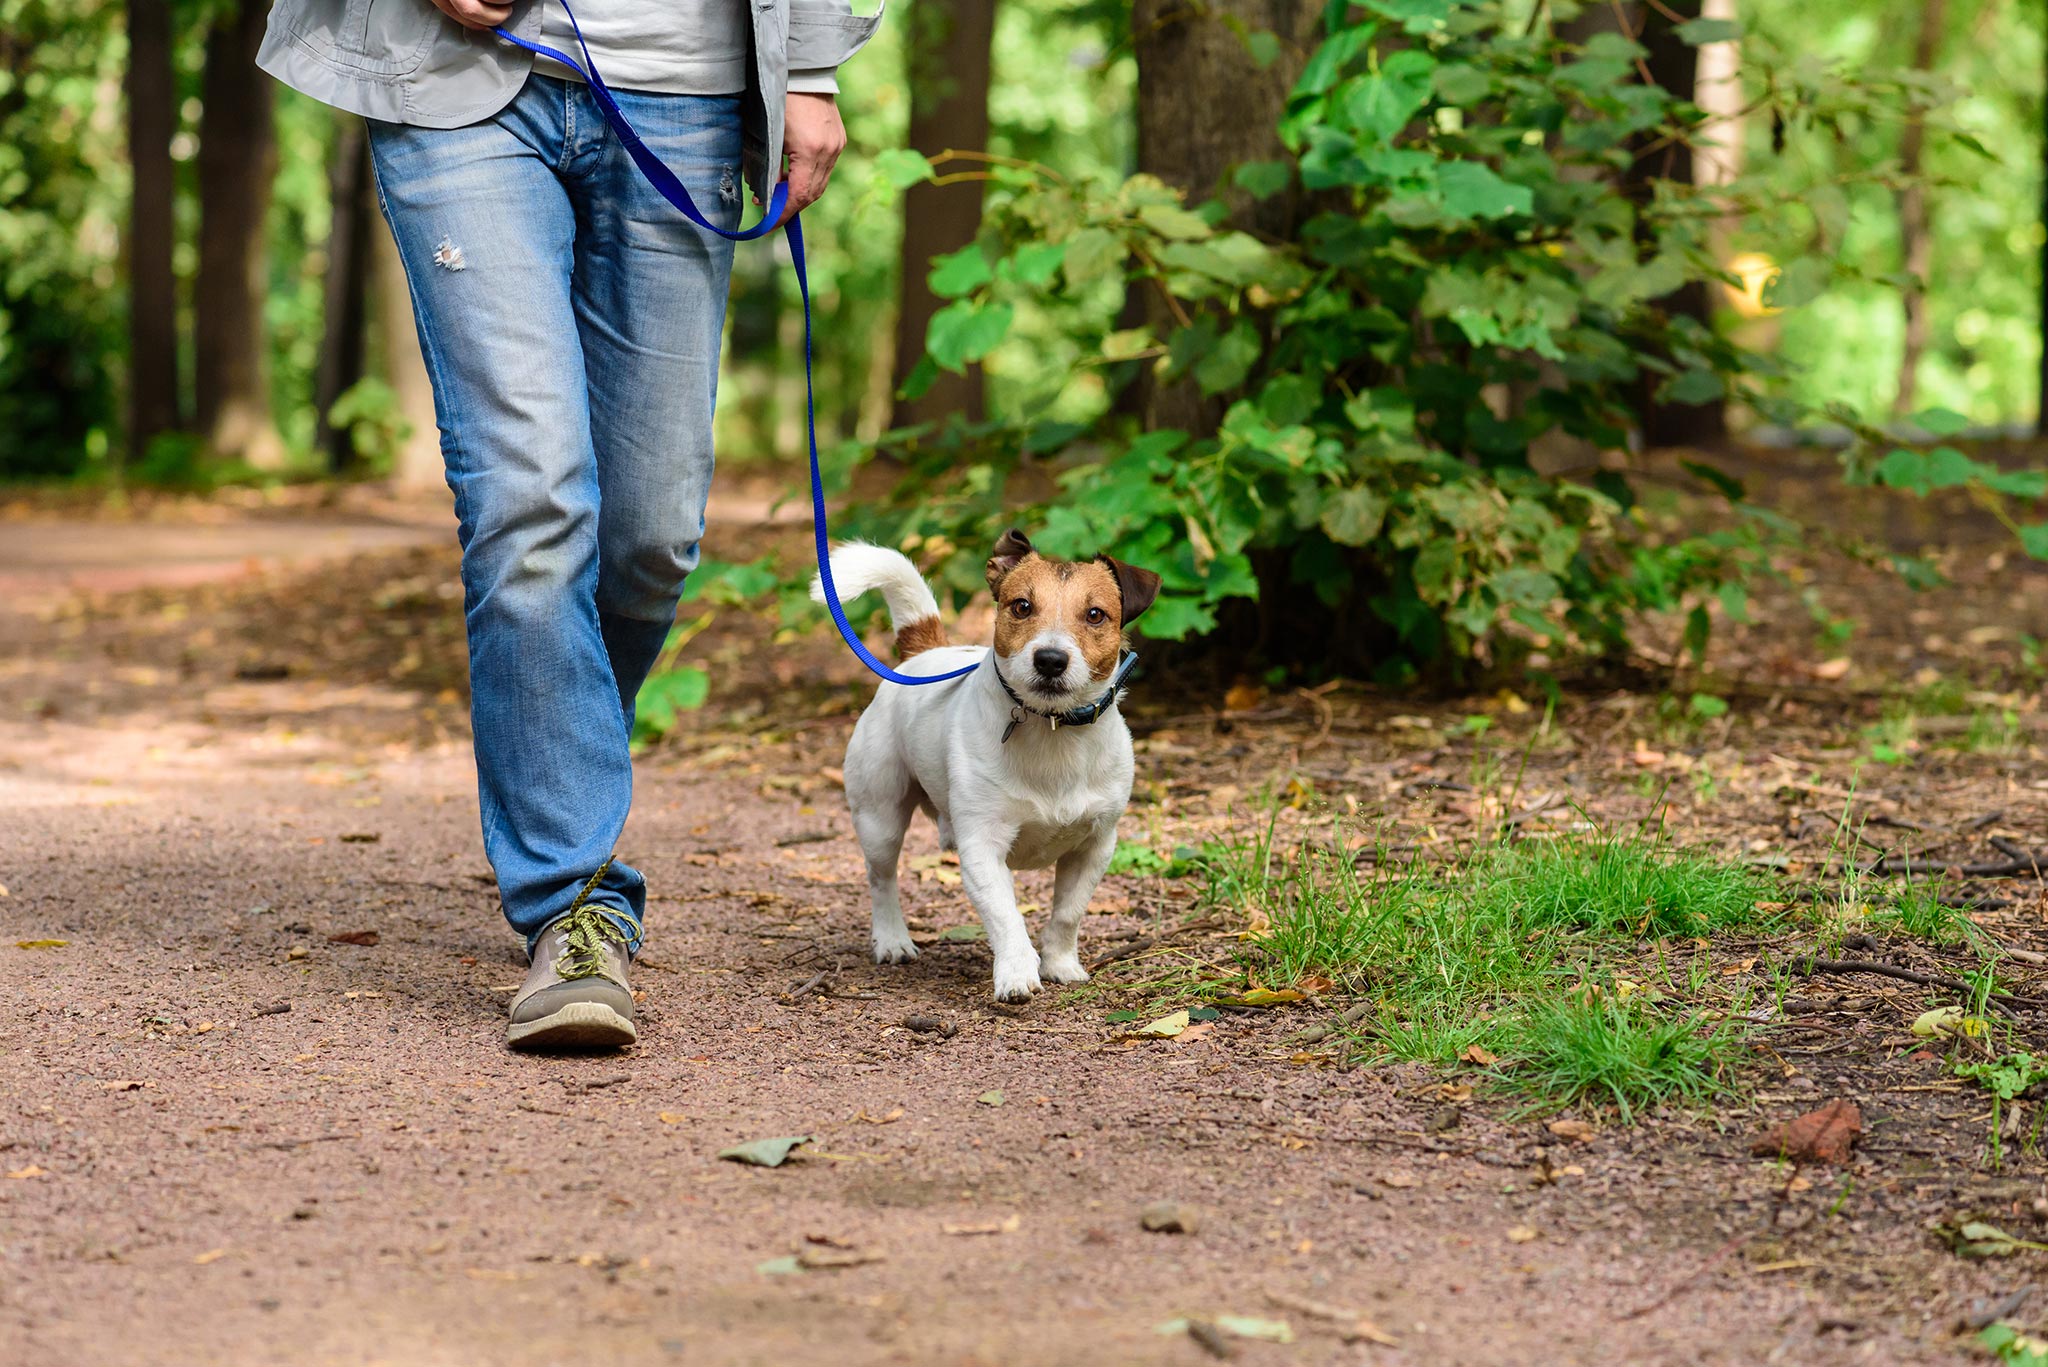 activities to do with your dog this spring in kittery, me